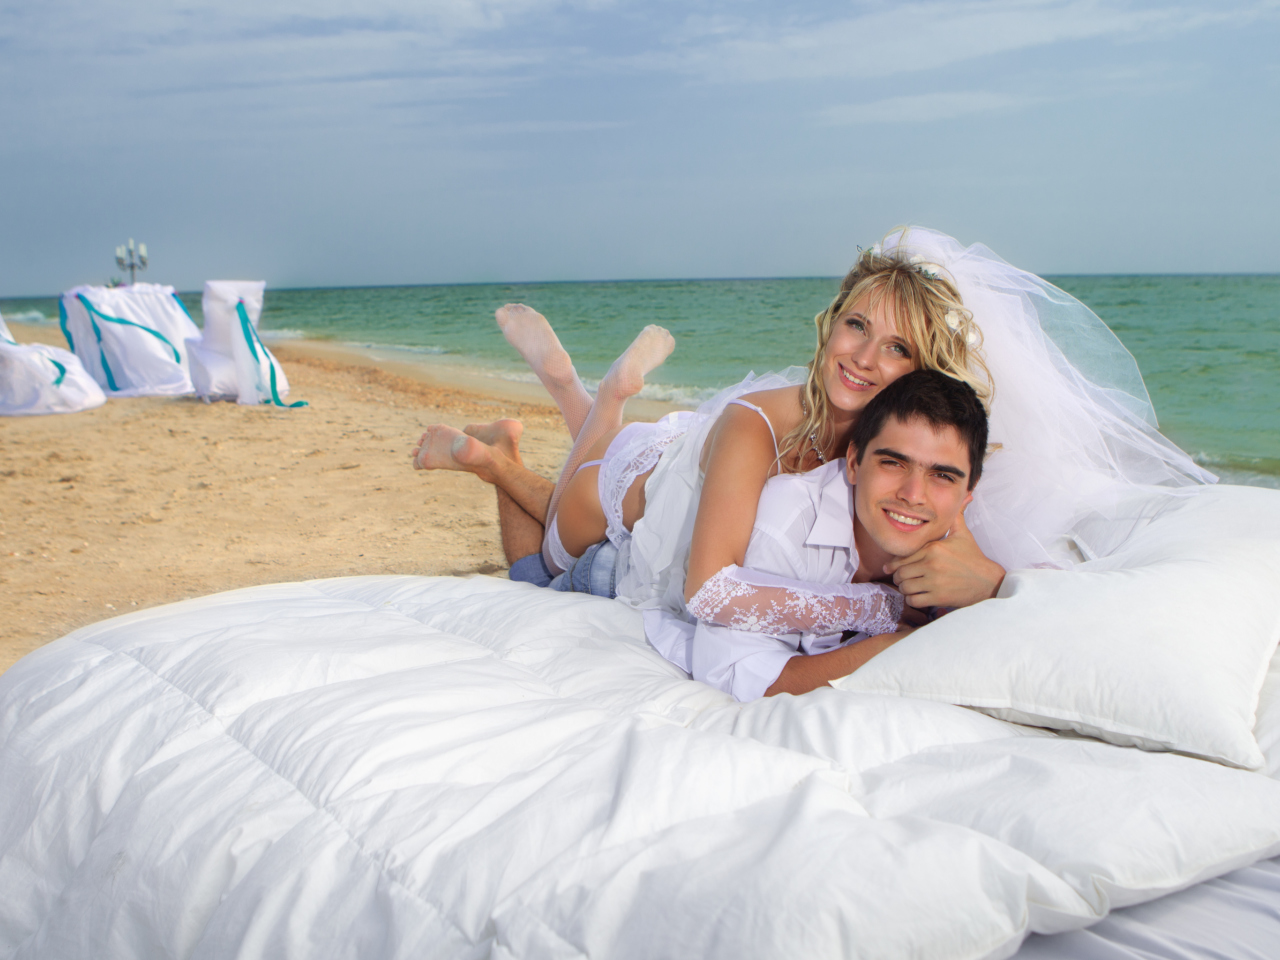 Just Married On Beach wallpaper 1280x960